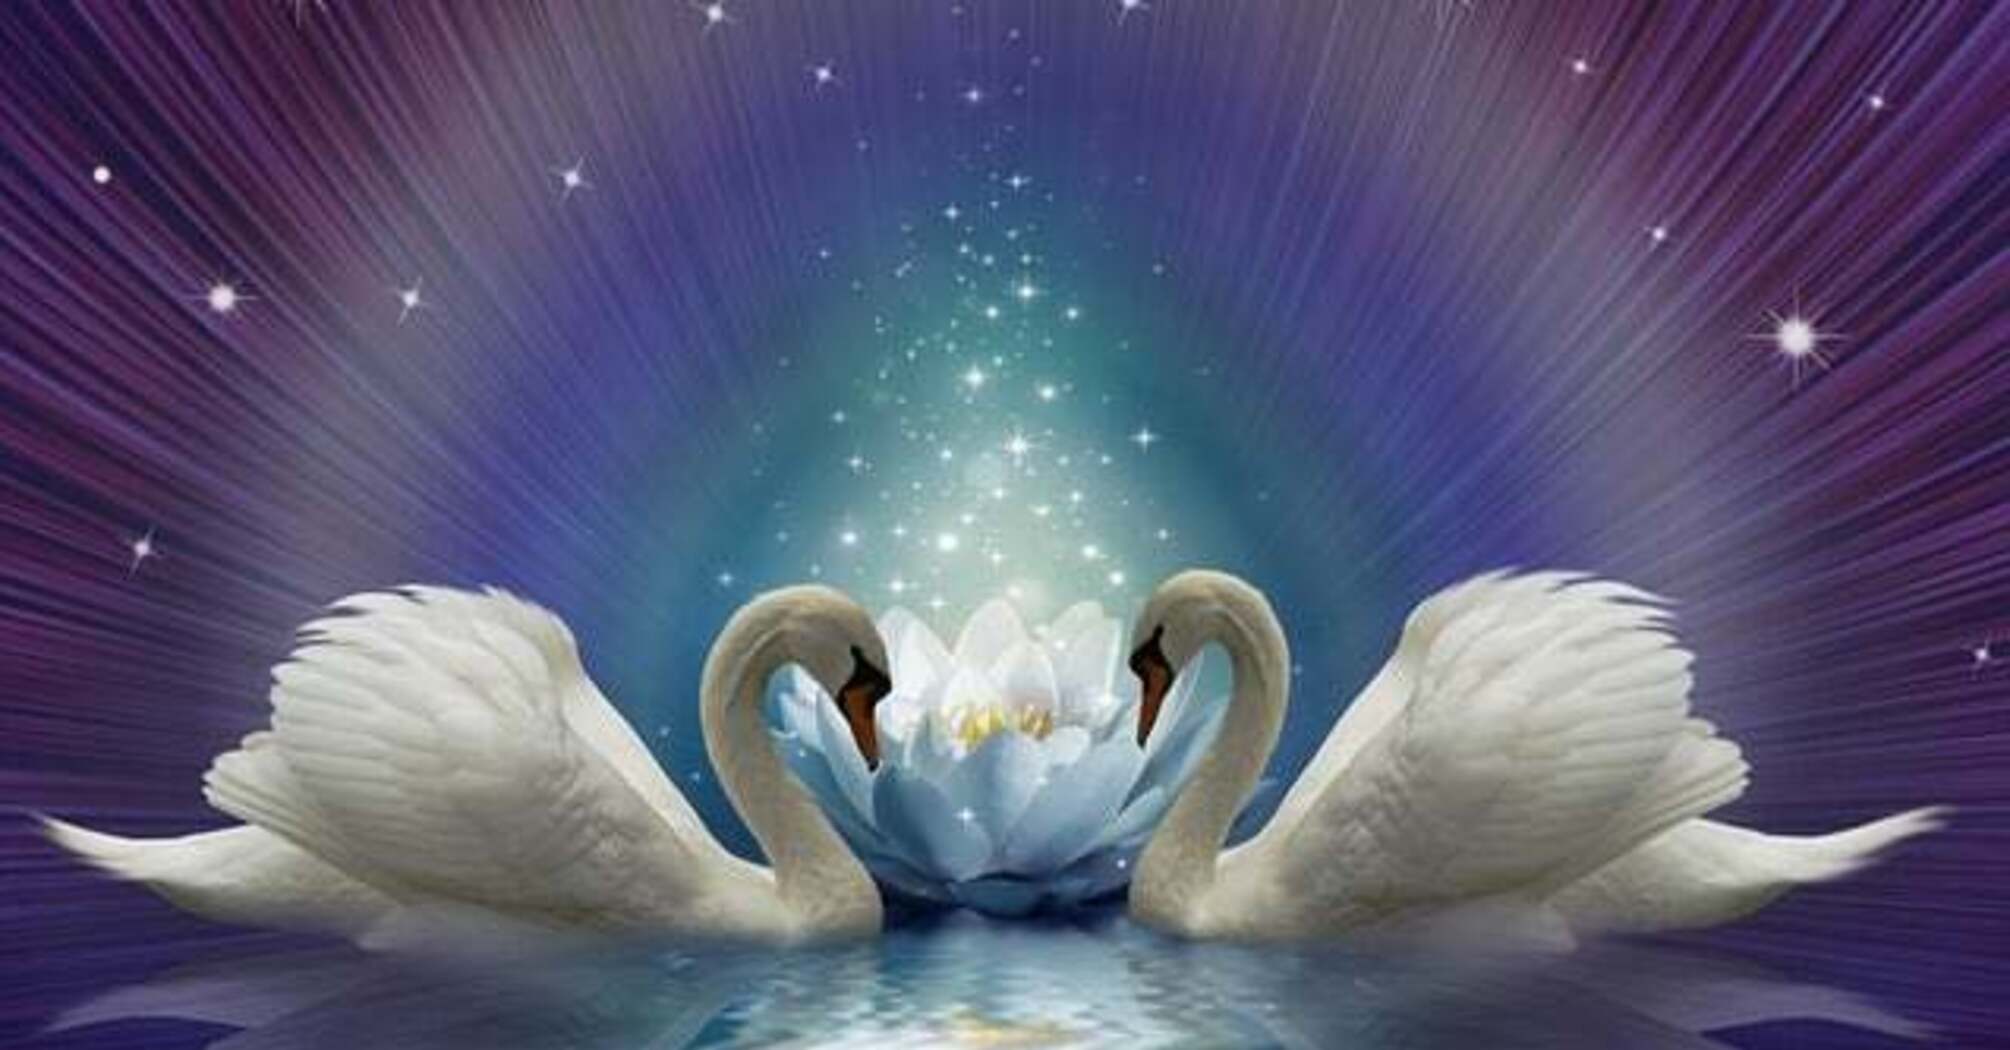 Spiritual meanings of swans